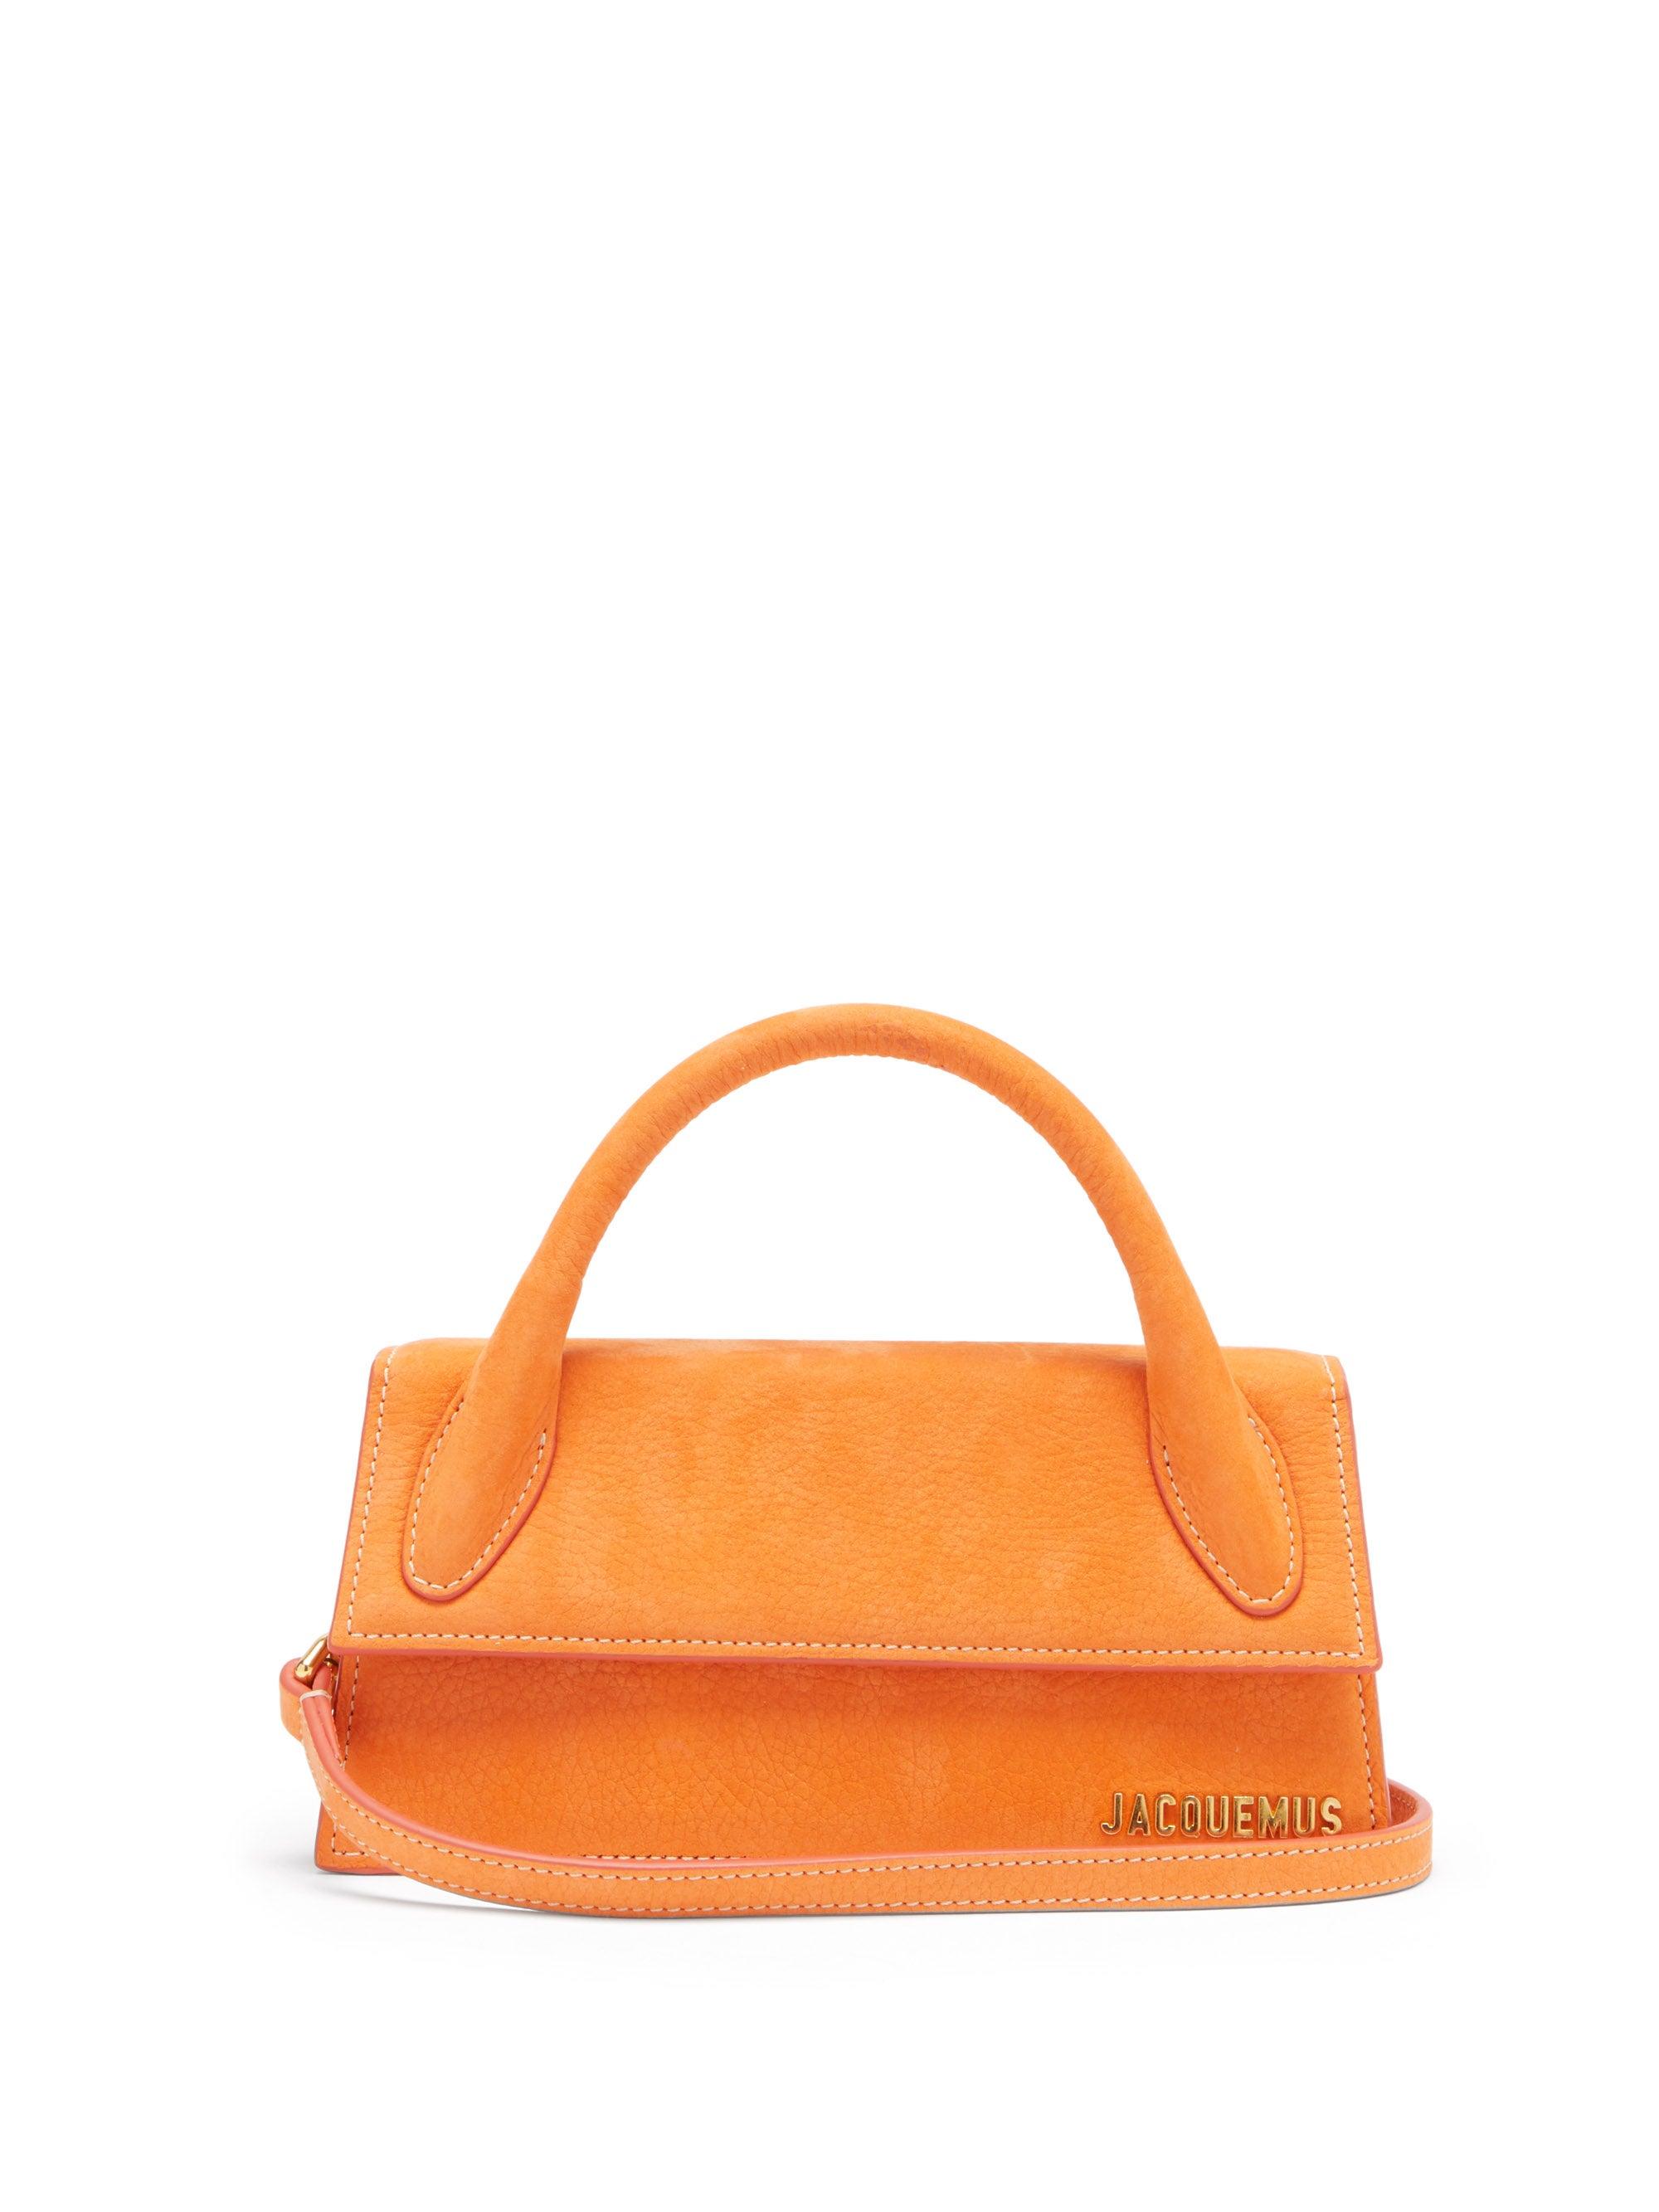 Jacquemus Chiquito Long Leather Cross-body Bag in Orange | Lyst